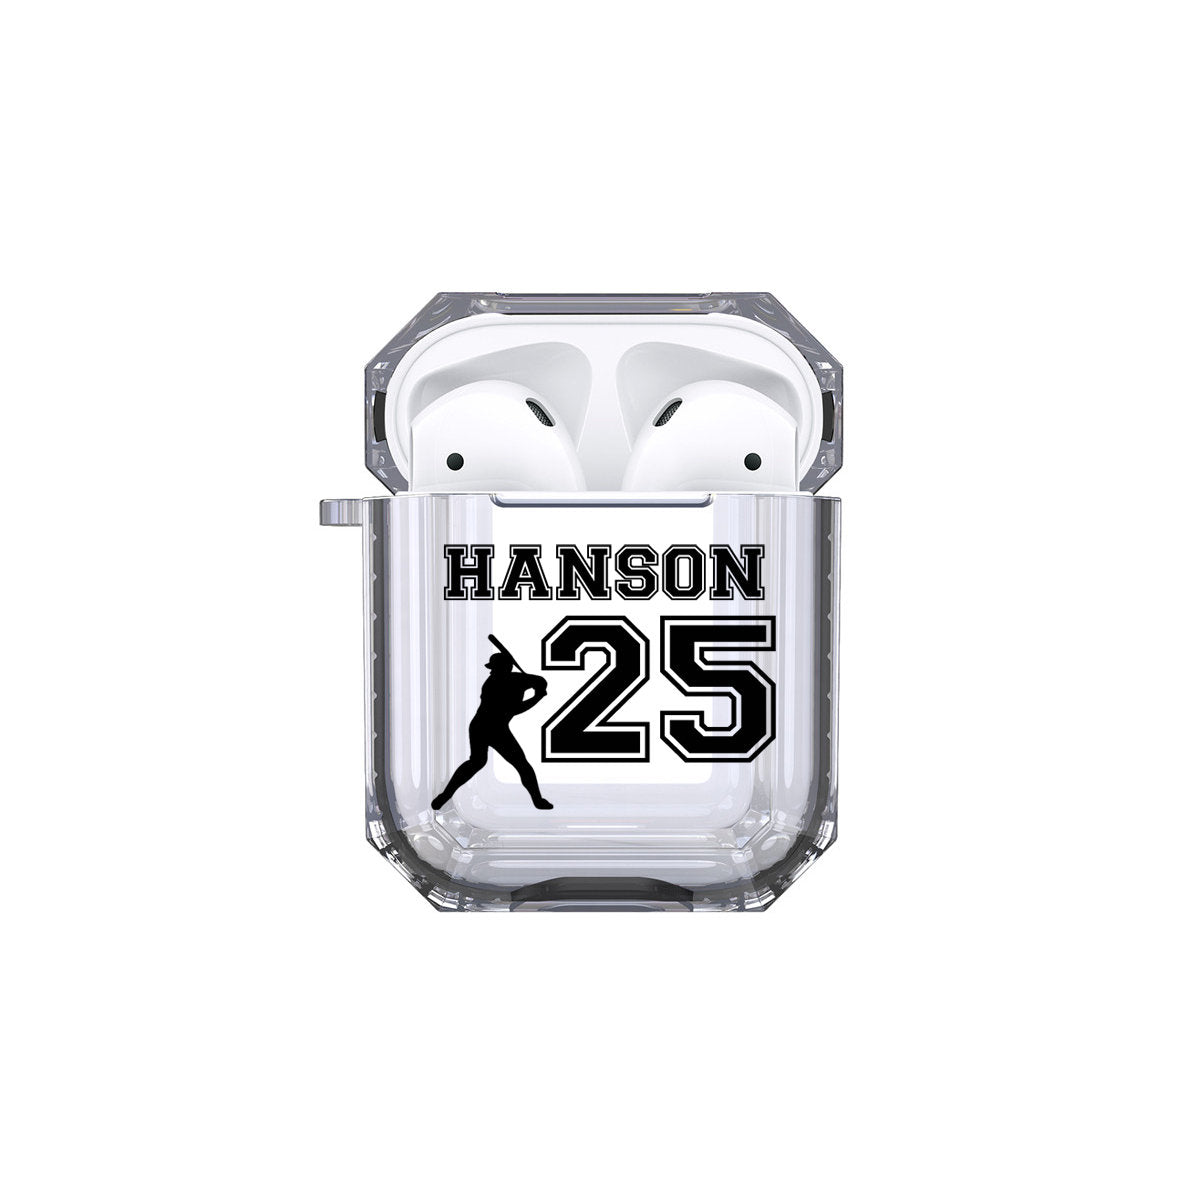 Protective Customized Sports Airpod Case Baseball Name and Number Airpods Case Personalized Gift for Baseball Player Coach Mom Dad Fan Lover